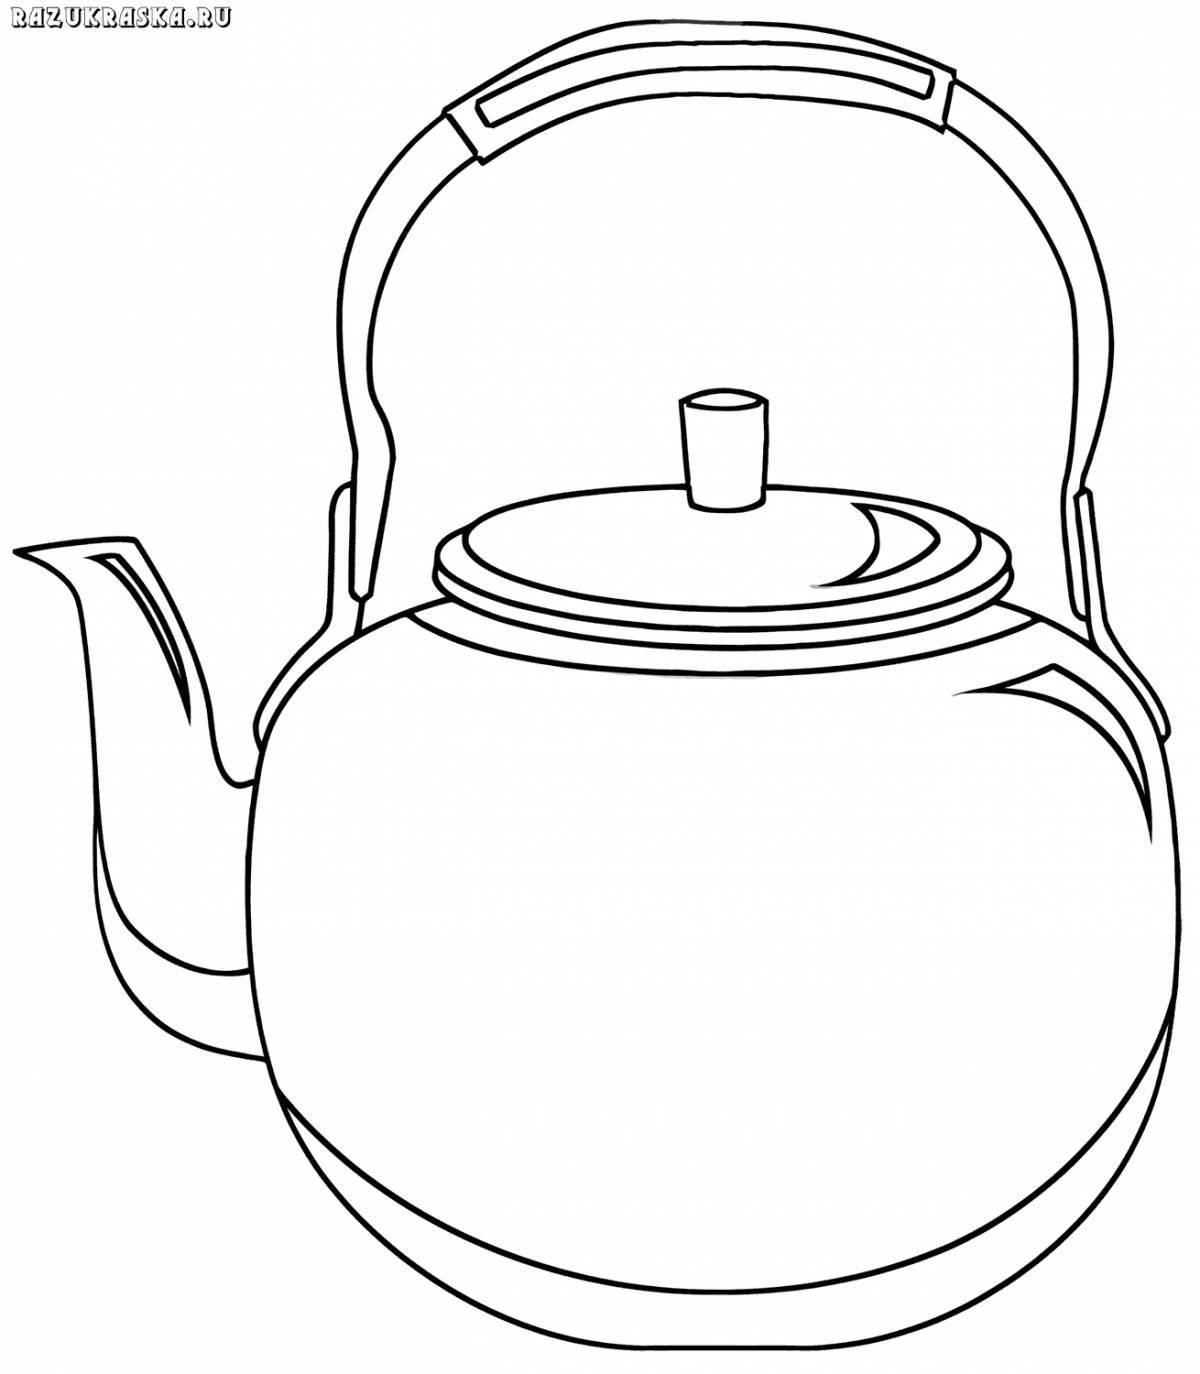 Coloring book magic teapot for children 3-4 years old